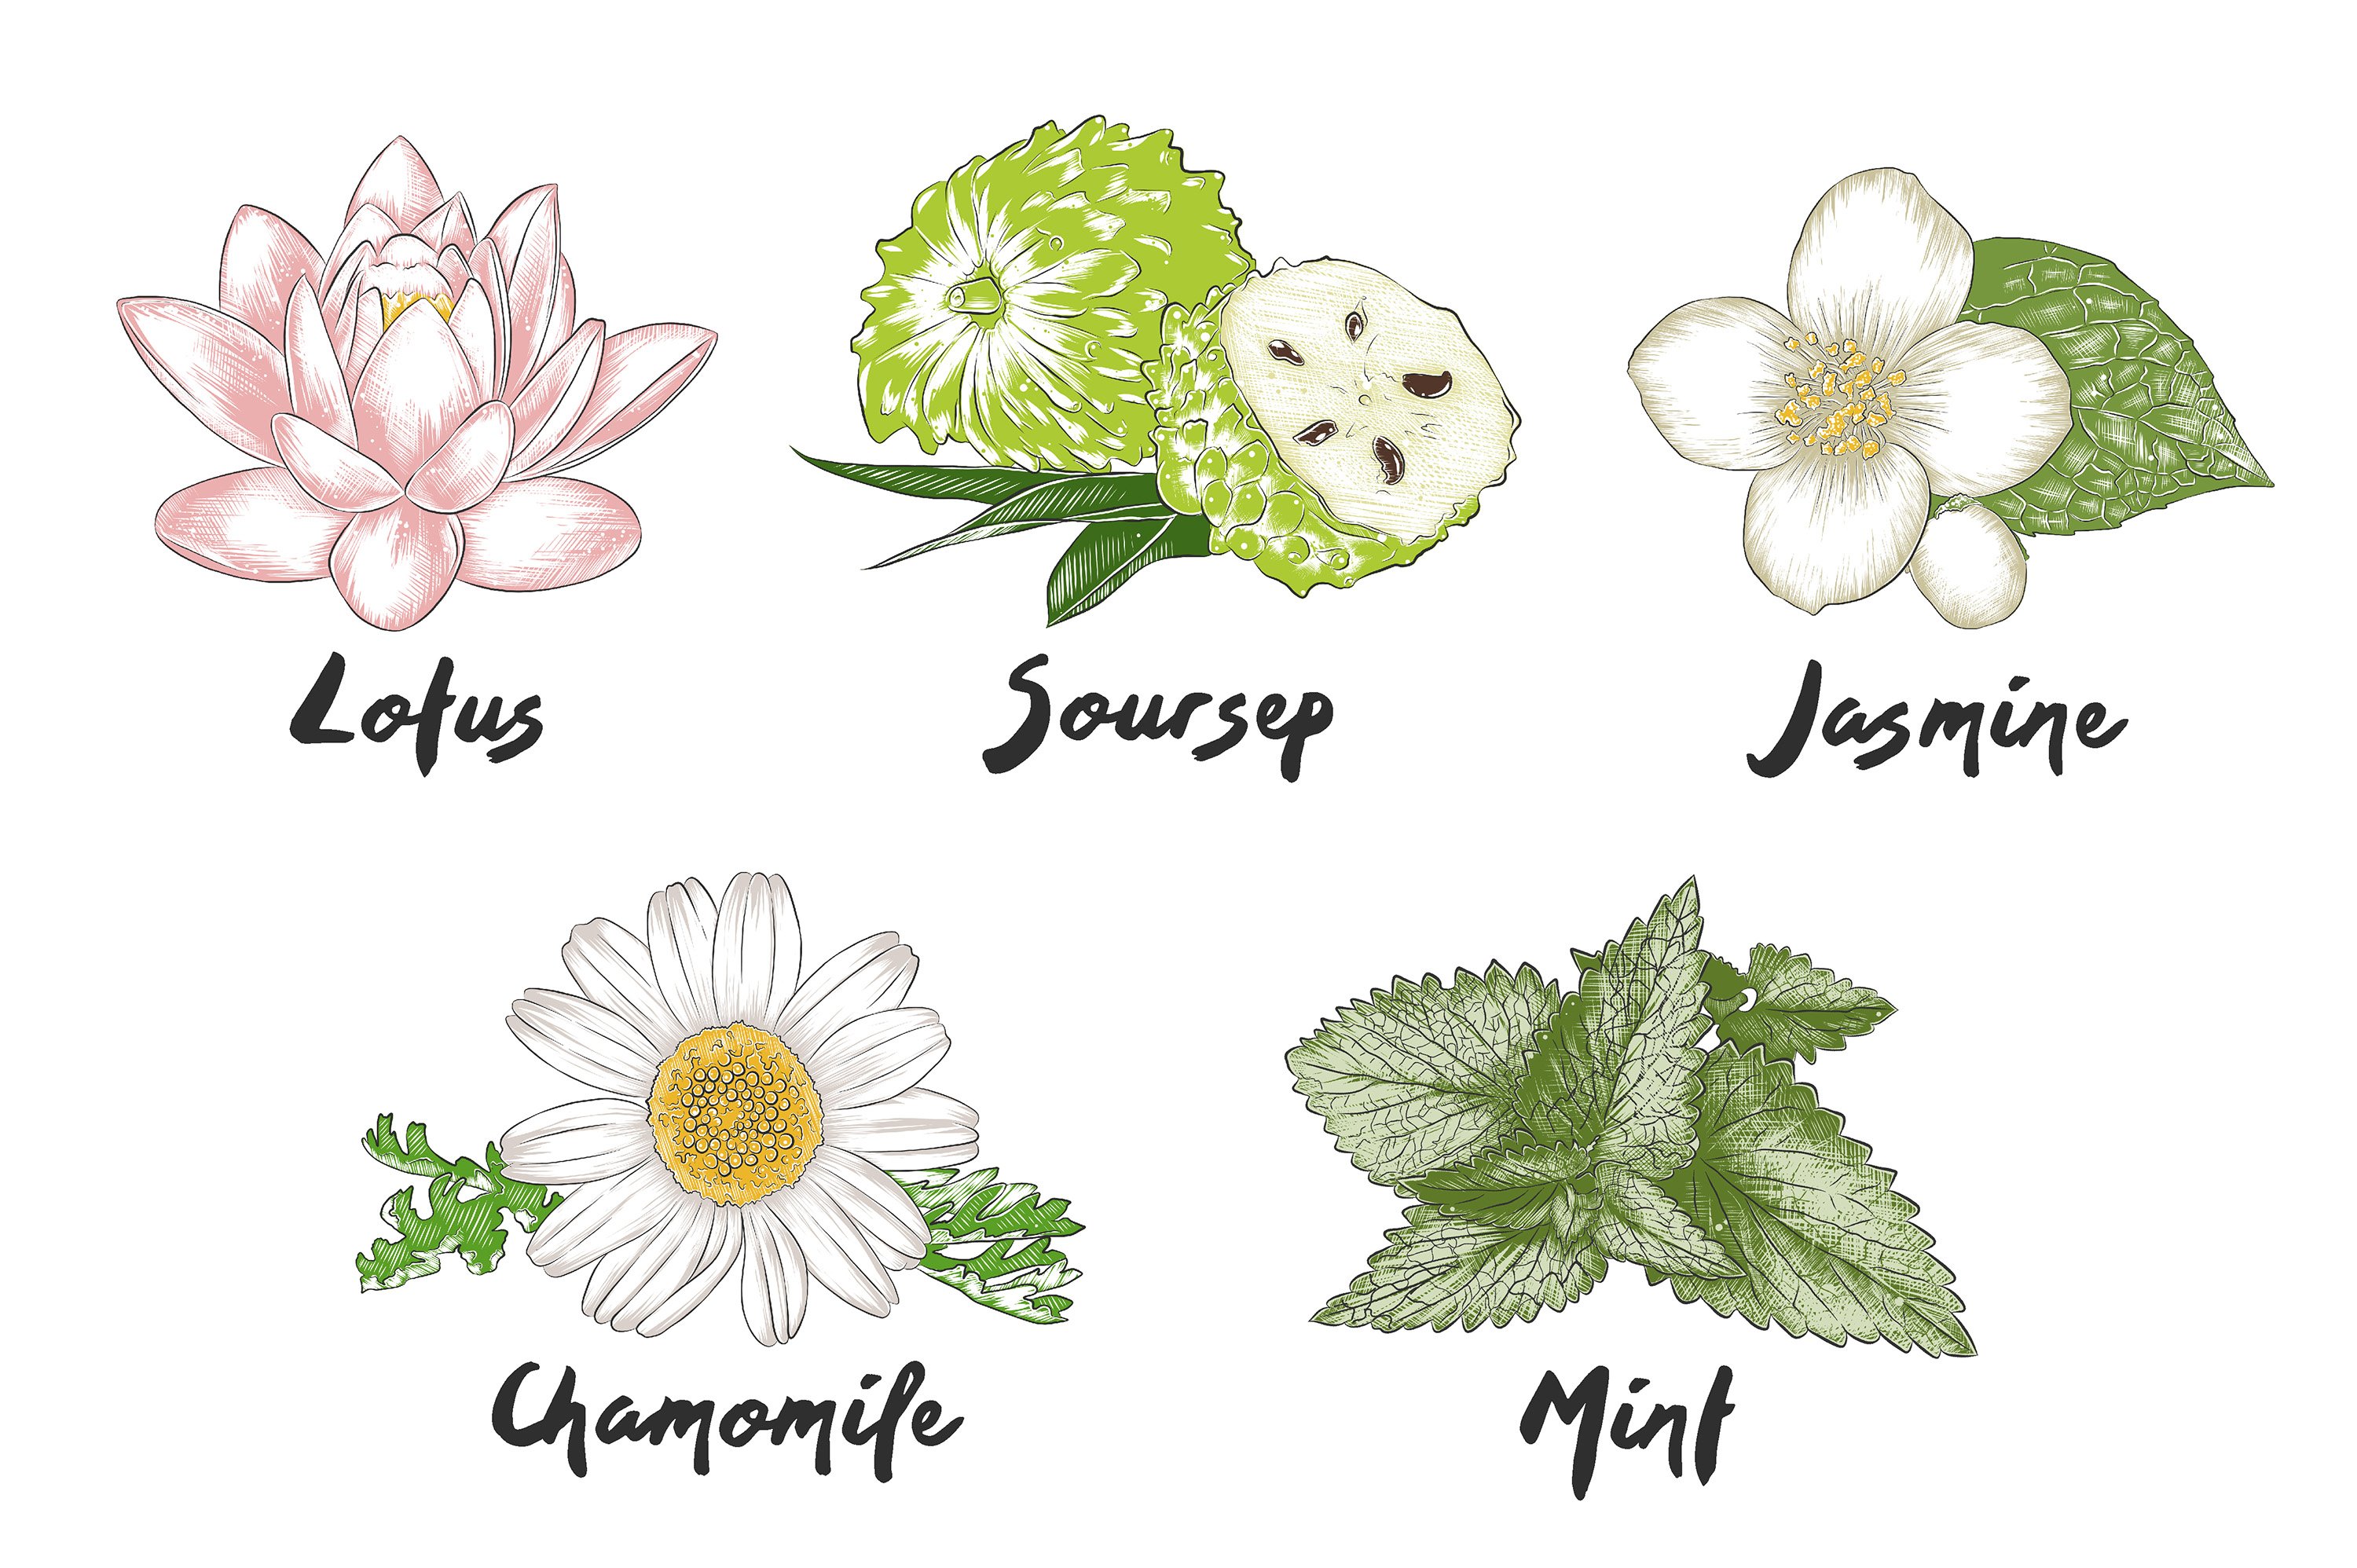 A bunch of different types of flowers on a white background.